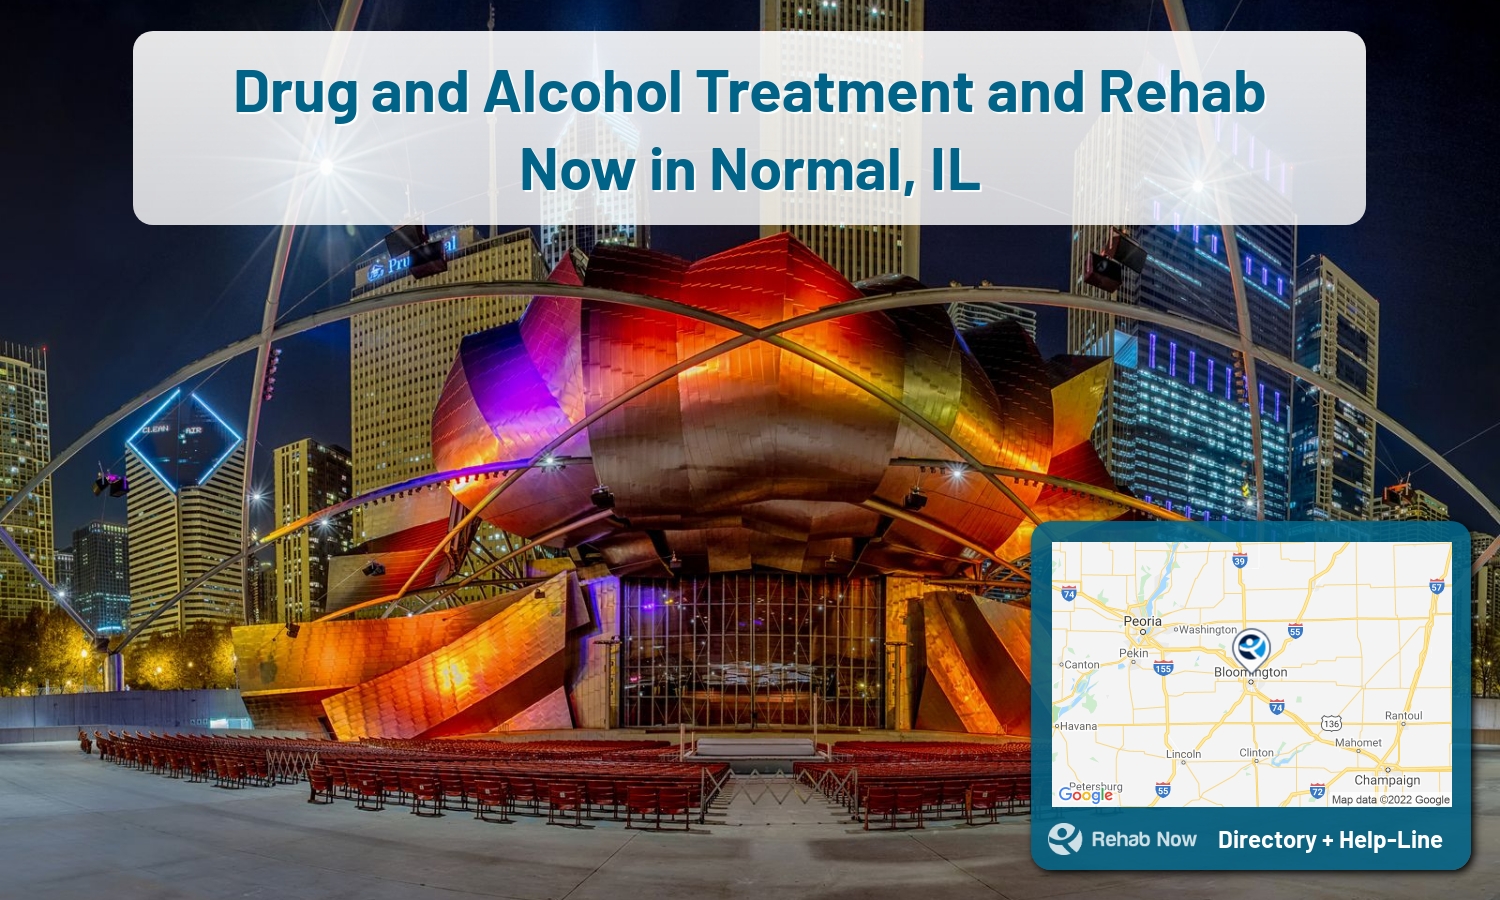 Ready to pick a rehab center in Normal? Get off alcohol, opiates, and other drugs, by selecting top drug rehab centers in Illinois